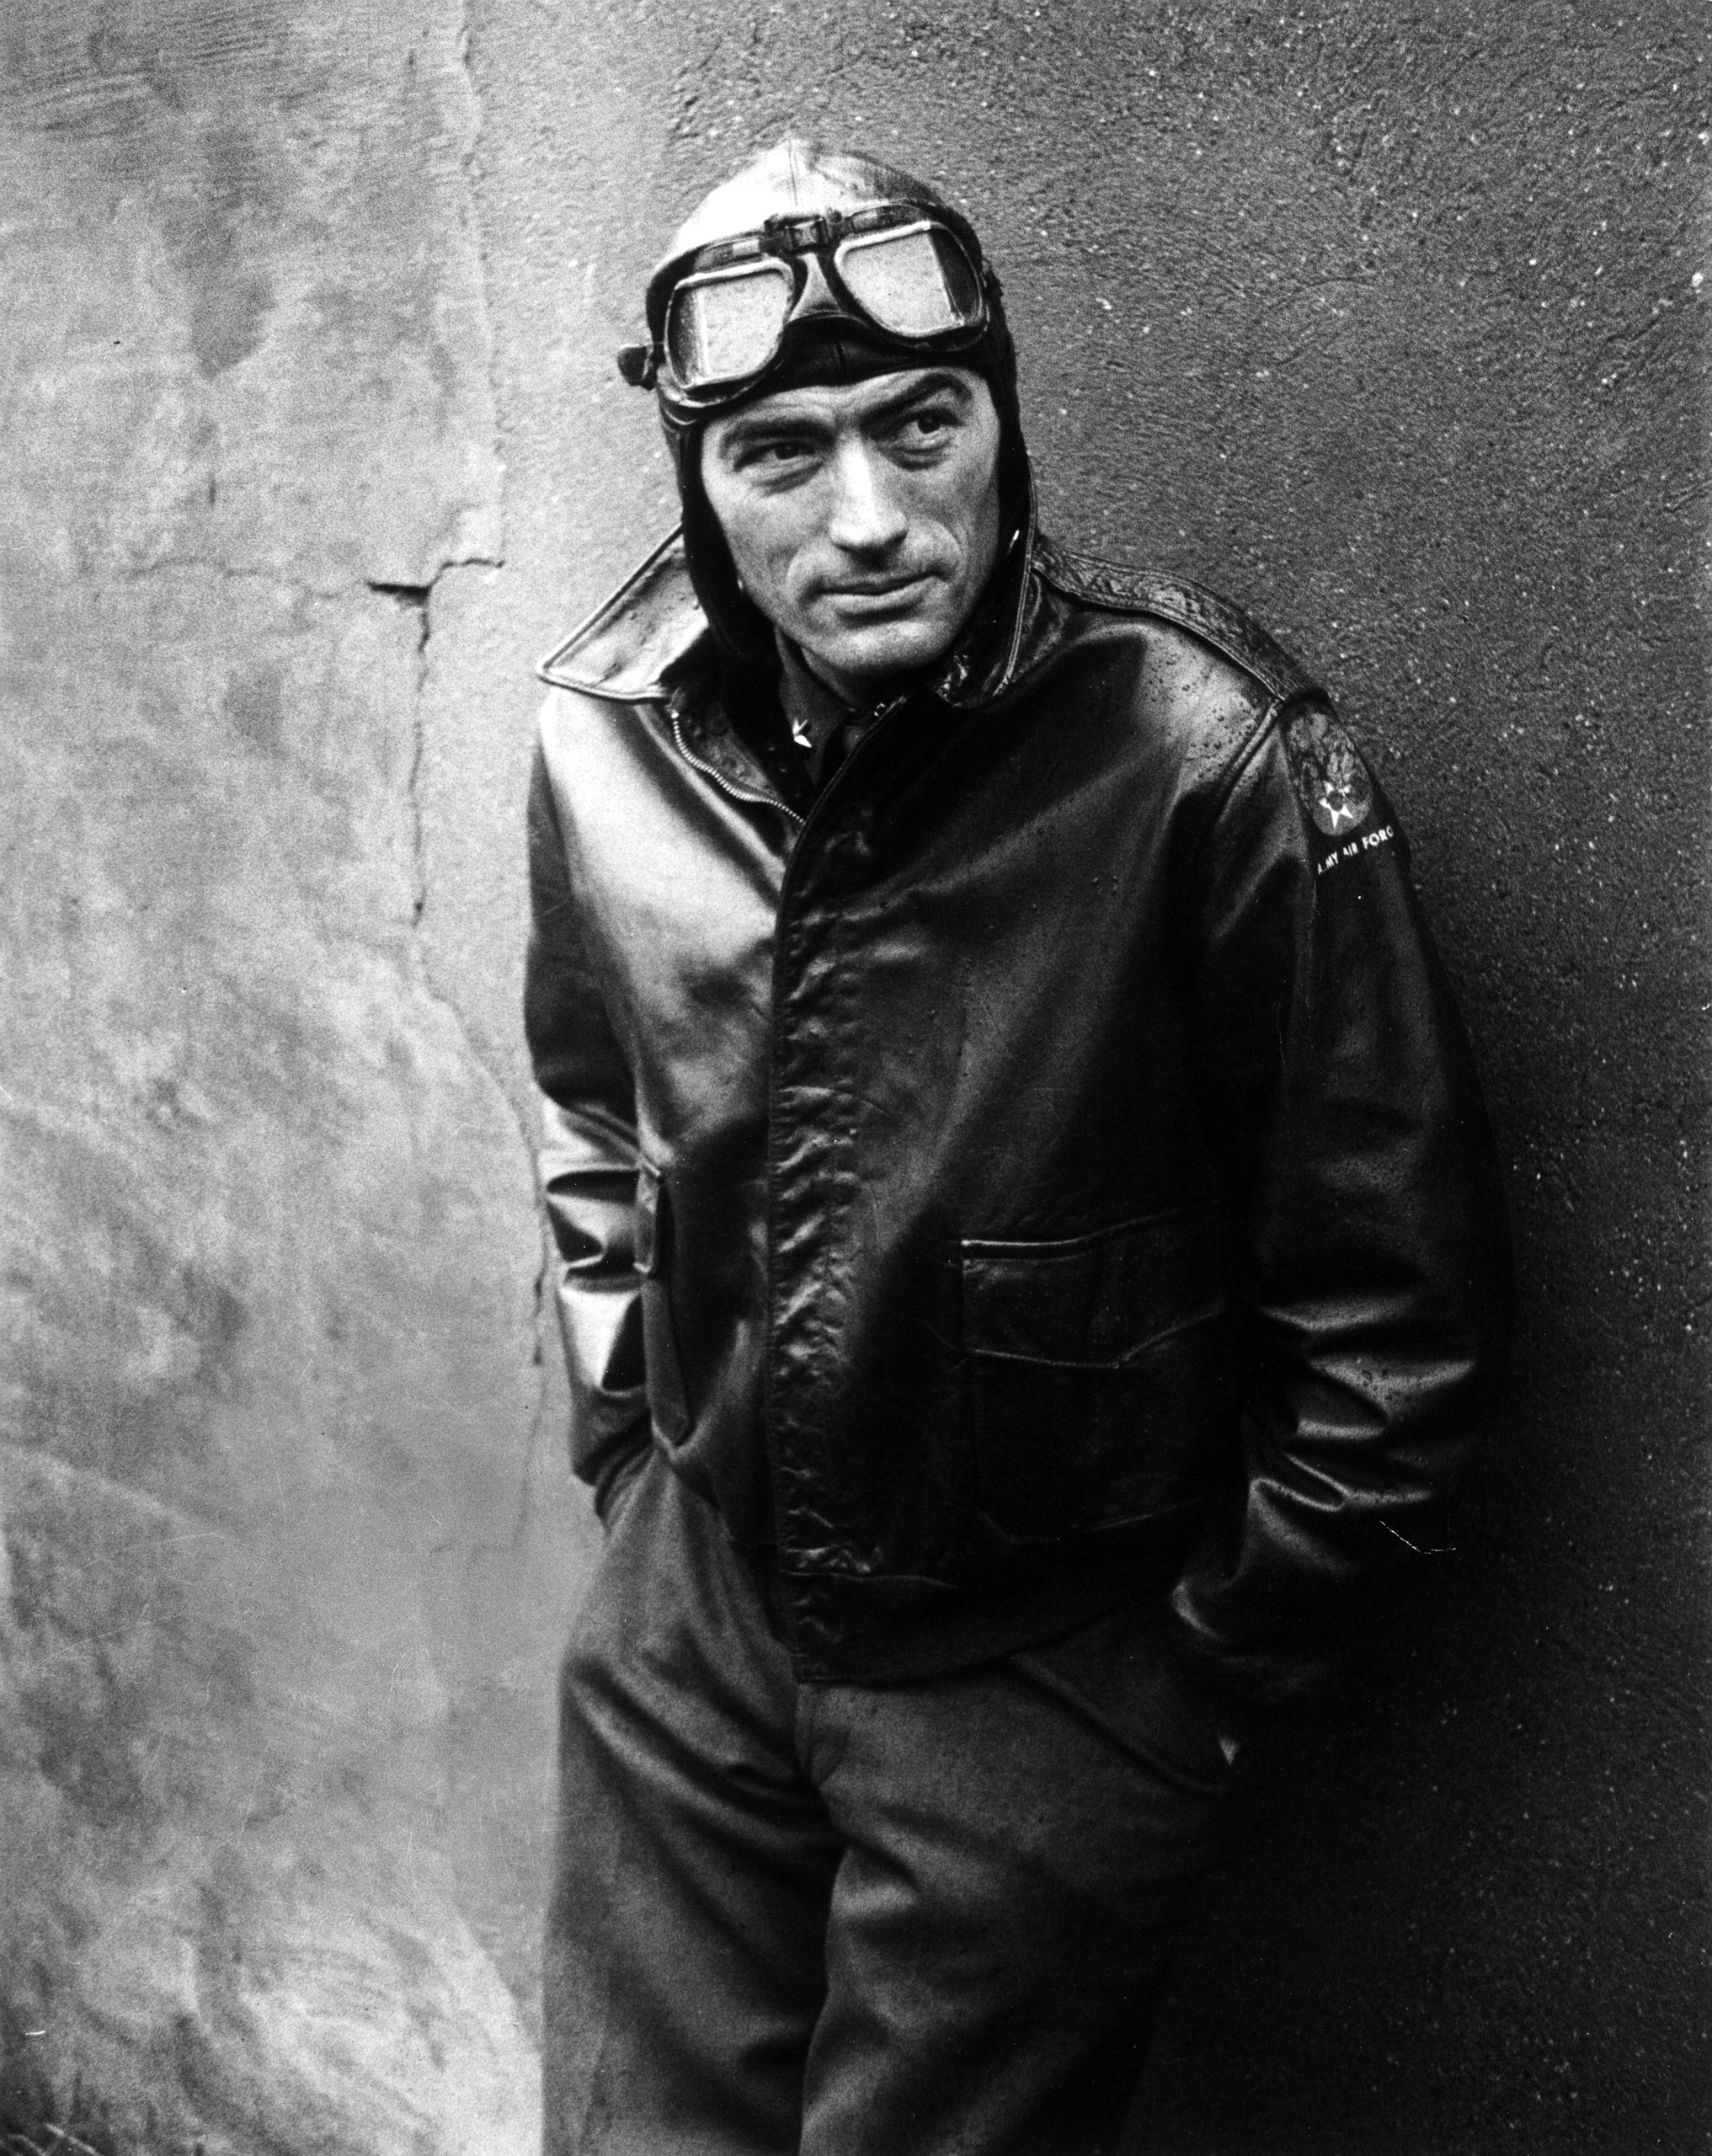 Gregory Peck costumed as WWII American Air Forces bomber pilot for movie "Twelve O'Clock High." 1950.